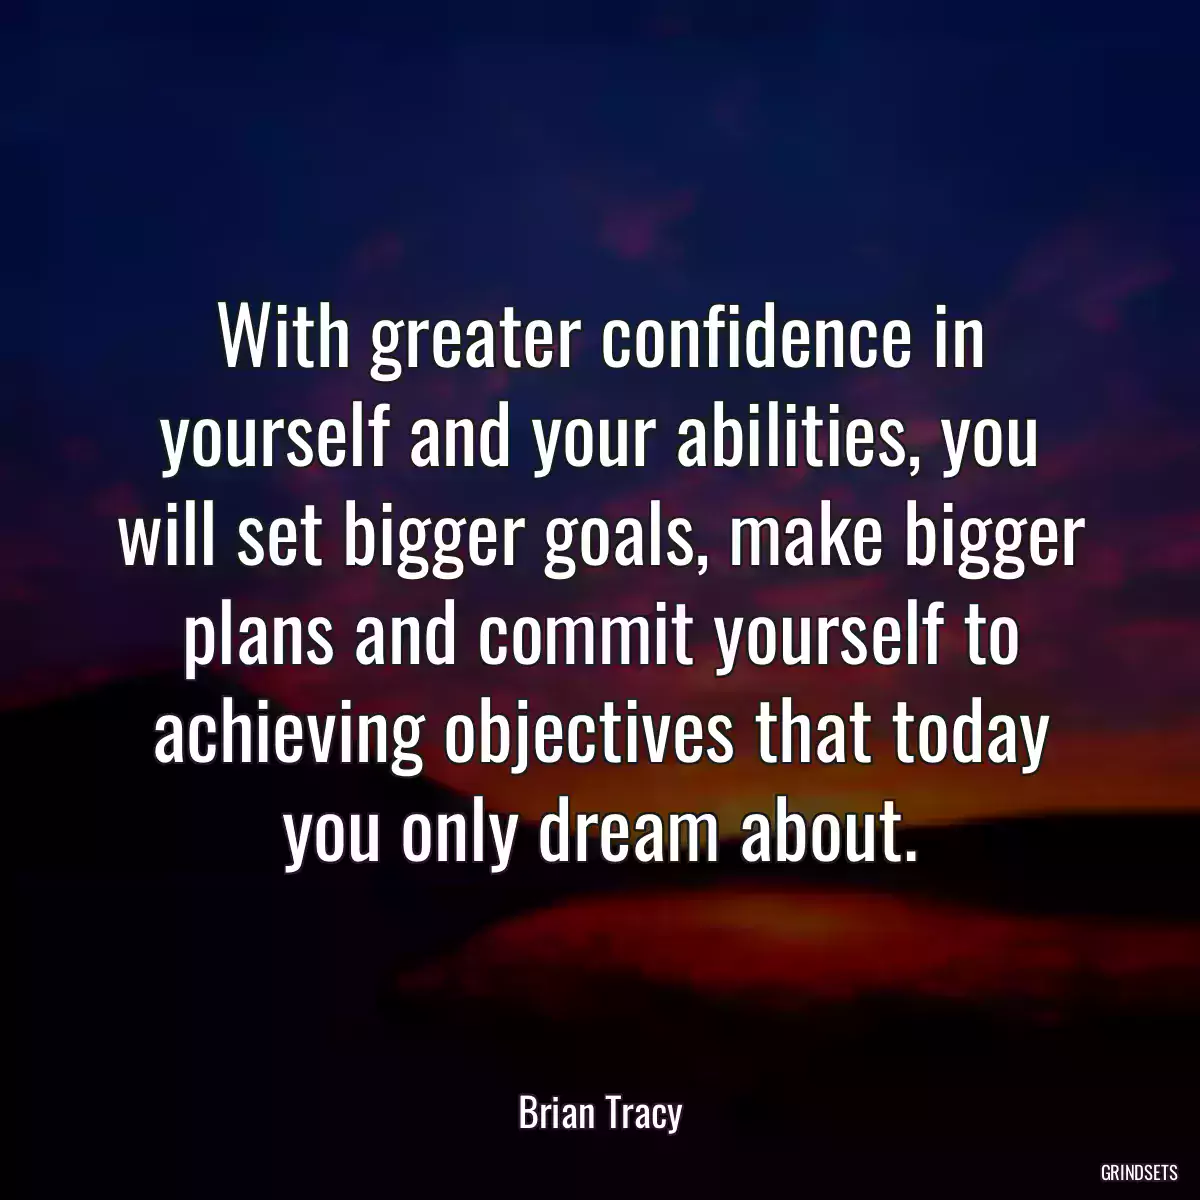 With greater confidence in yourself and your abilities, you will set bigger goals, make bigger plans and commit yourself to achieving objectives that today you only dream about.